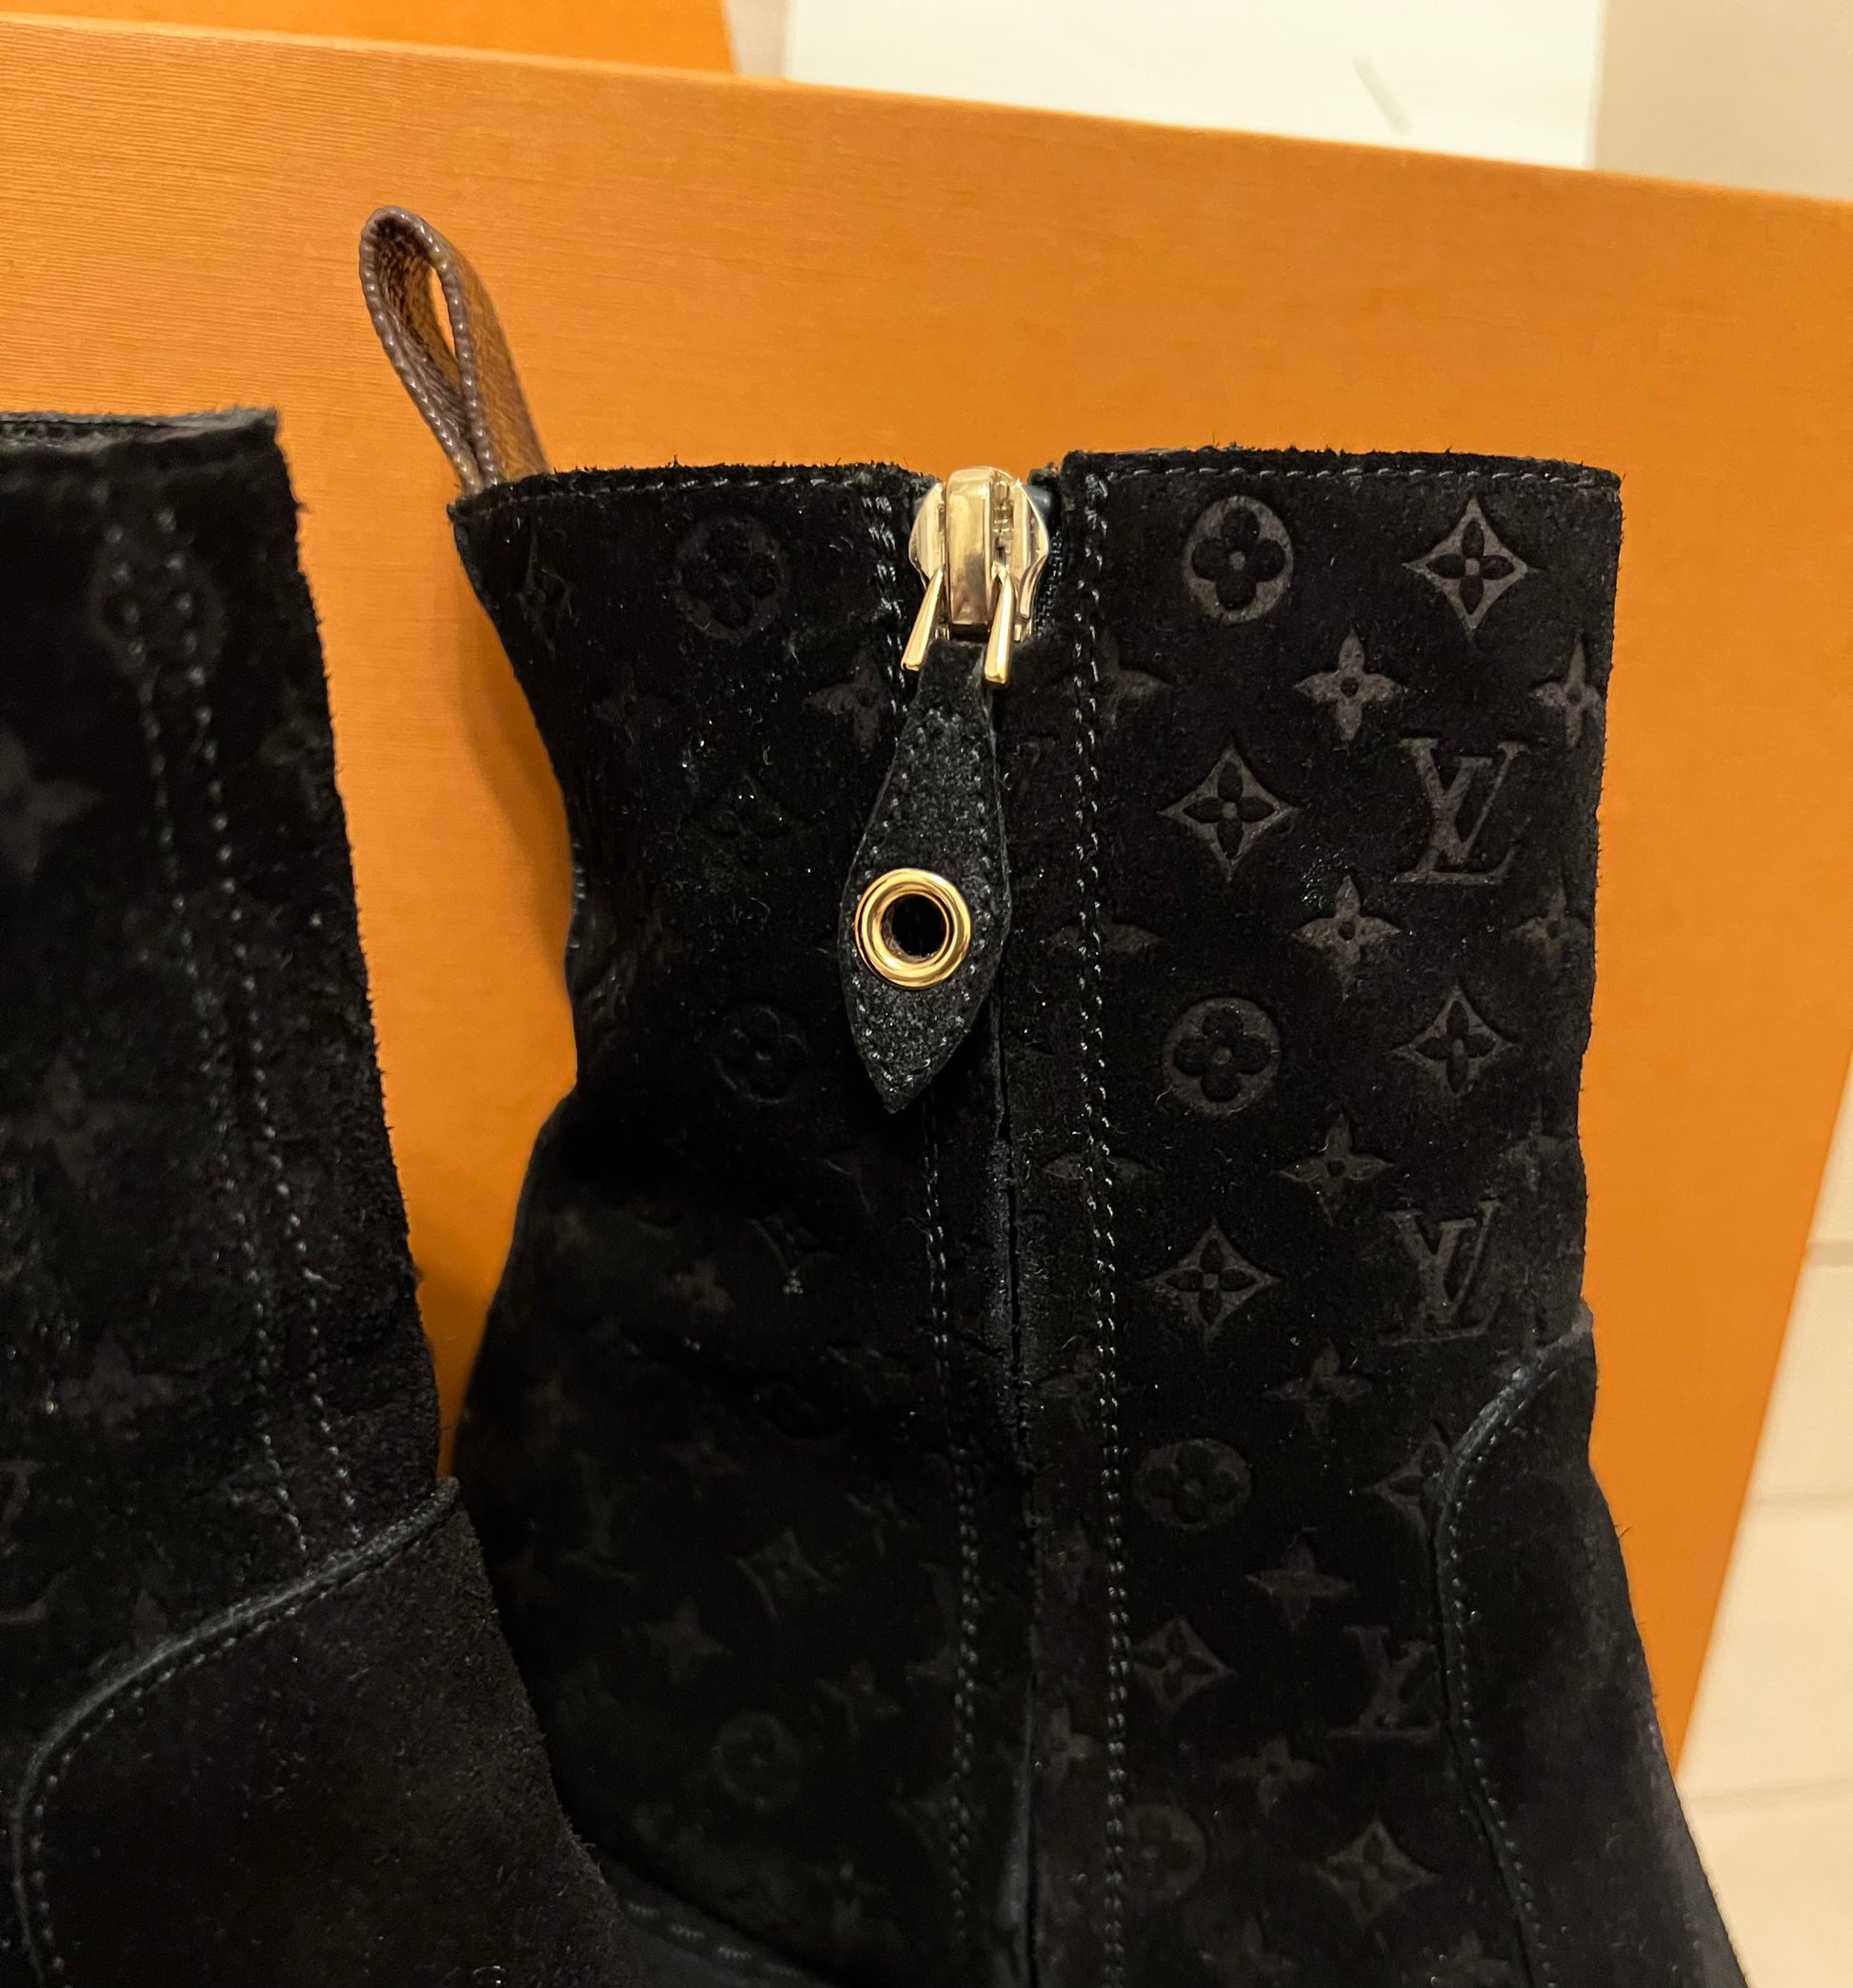 Fashion Bomb Daily - One of the hottest boot designs of the season by  @louisvuitton . These Patti Wedge high boots featuring zip and popper  details and LV monogram accents. Priced at